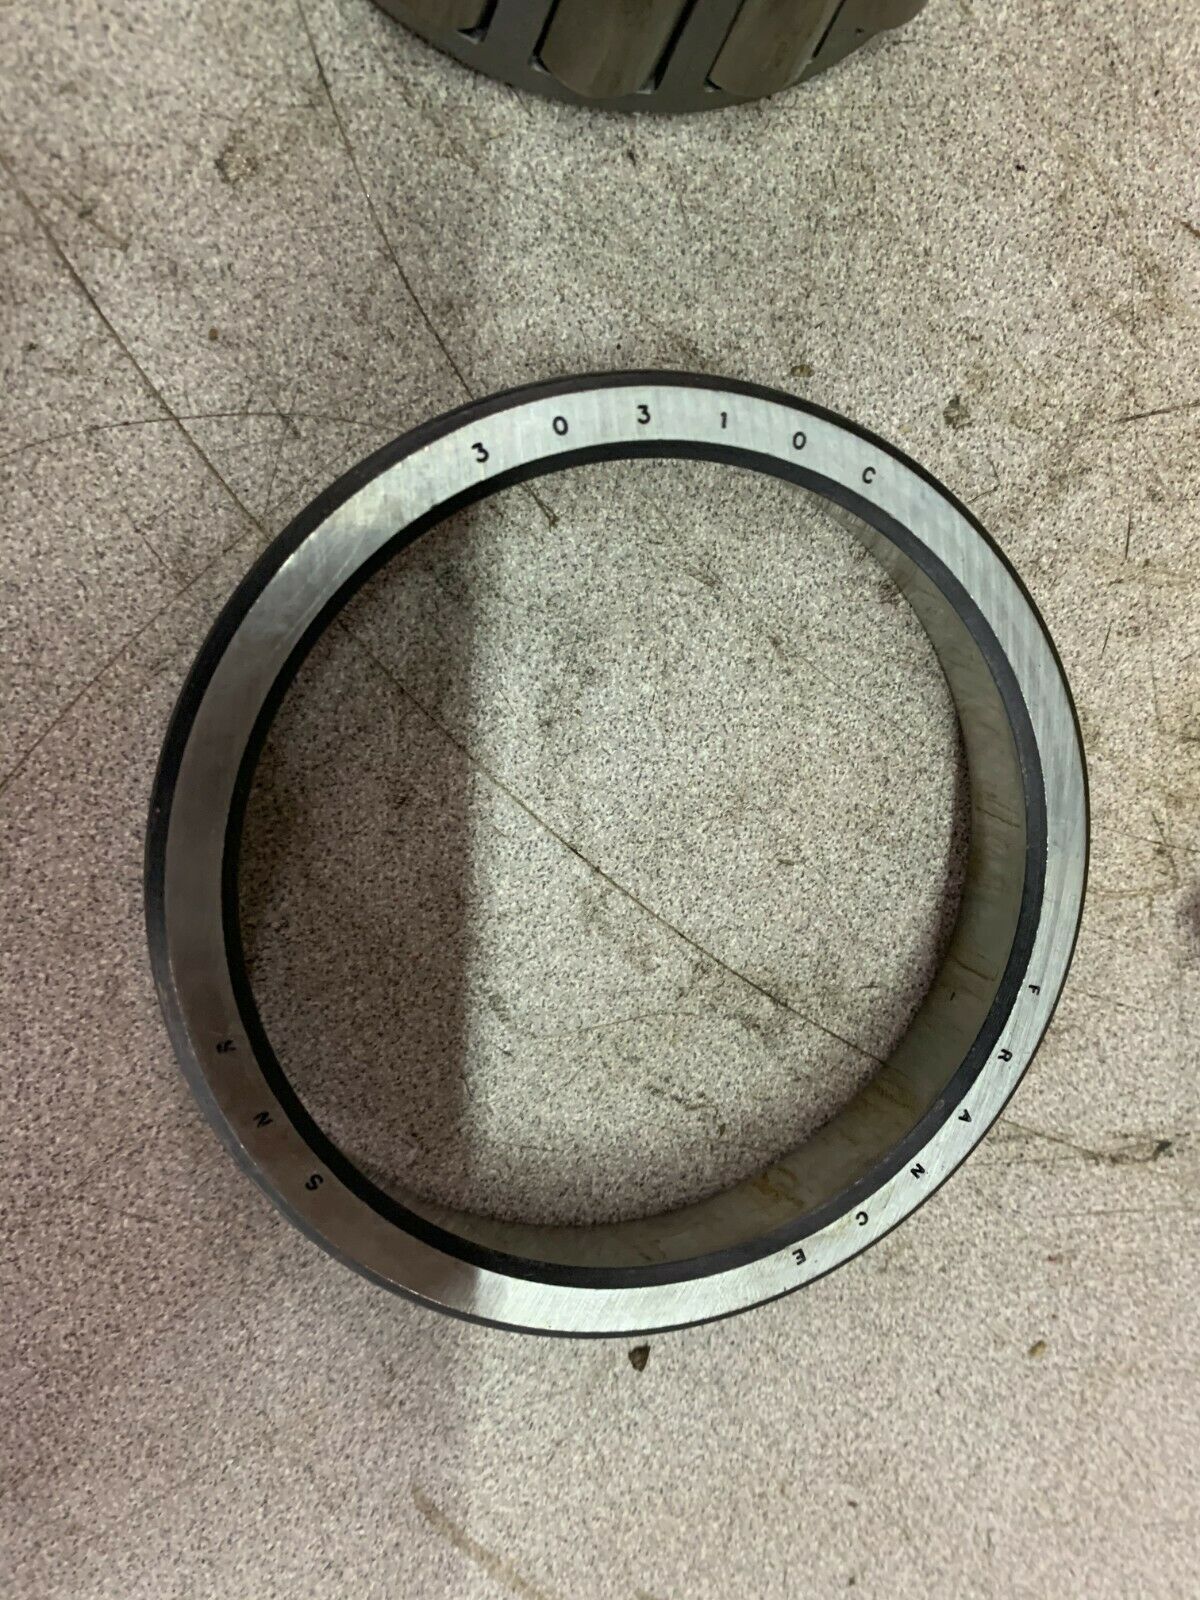 NEW IN BOX SNR BEARING AND RACE 30310C